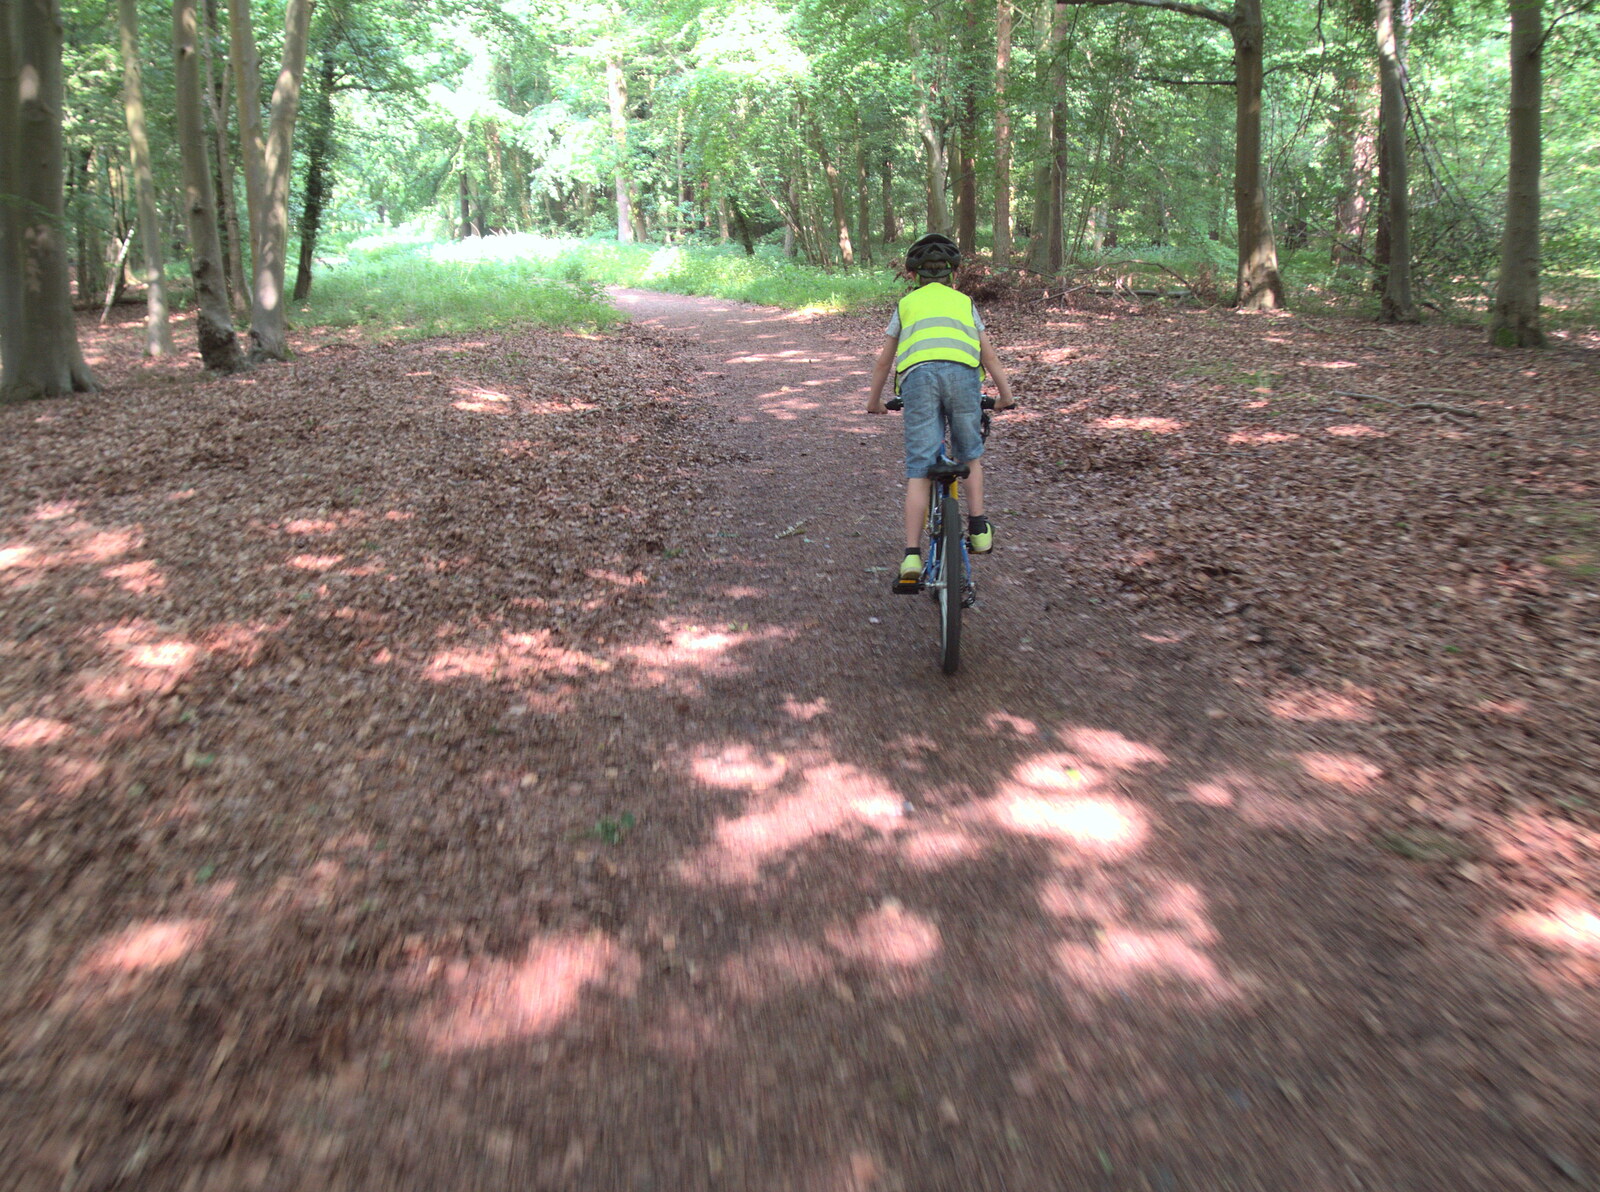 Fred whizzes off through the forest from Dower House Camping, West Harling, Norfolk - 27th May 2018